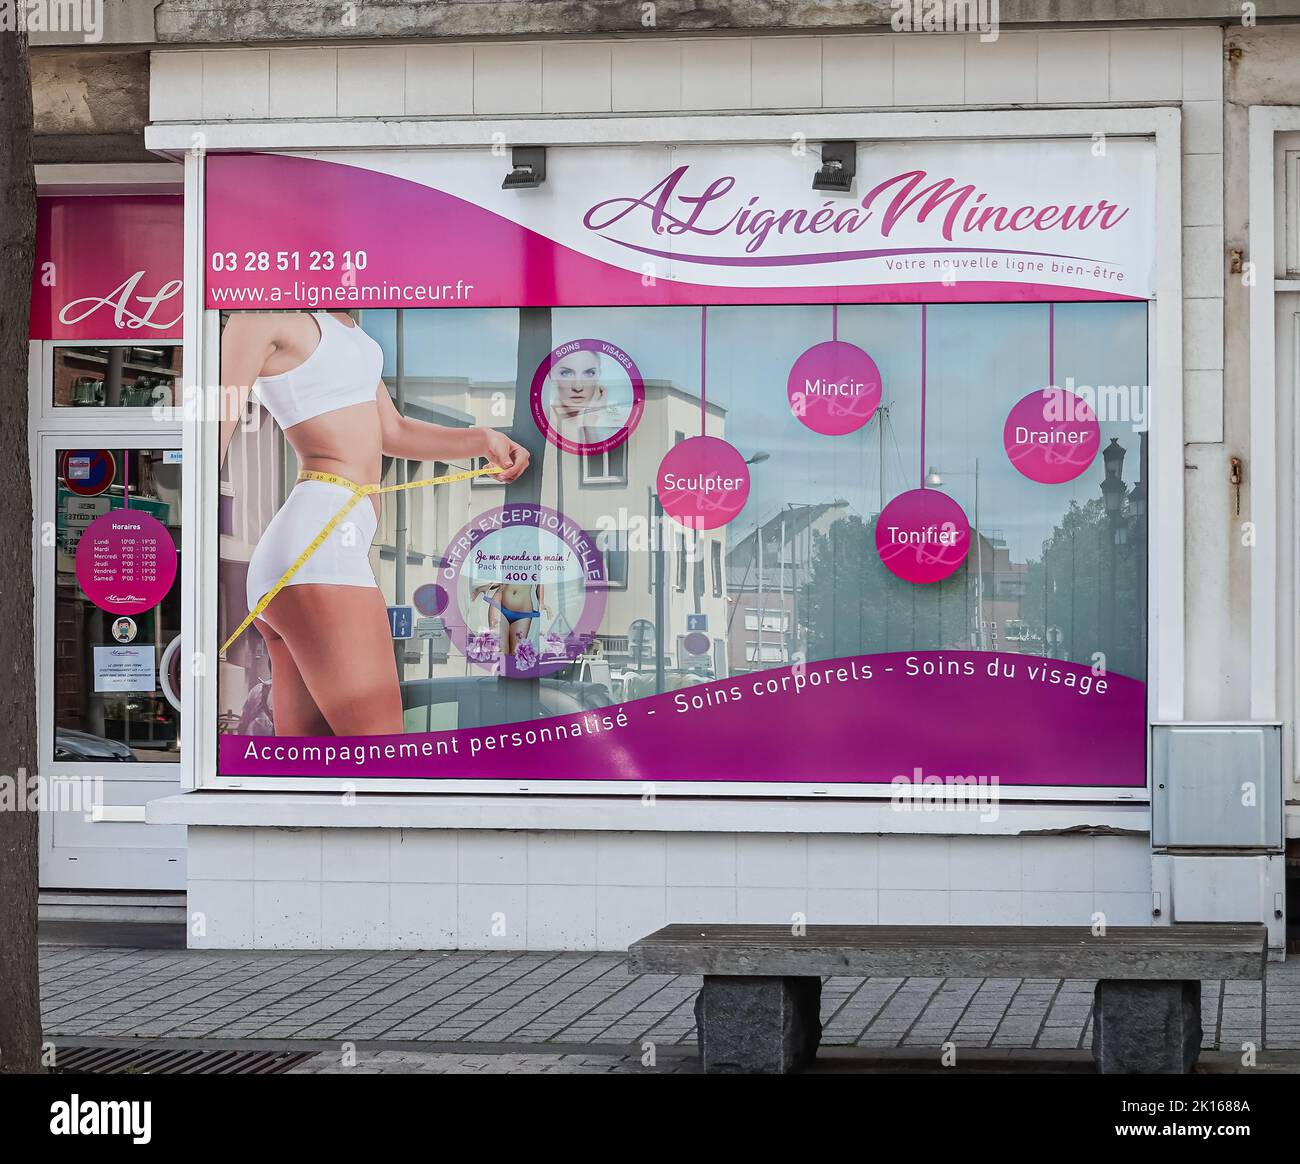 Europe, France, Dunkerque - July 9, 2022: Alignea Minceur is Beauty therapist through specilized services such as Cryotherapy, massage, excercise plan Stock Photo